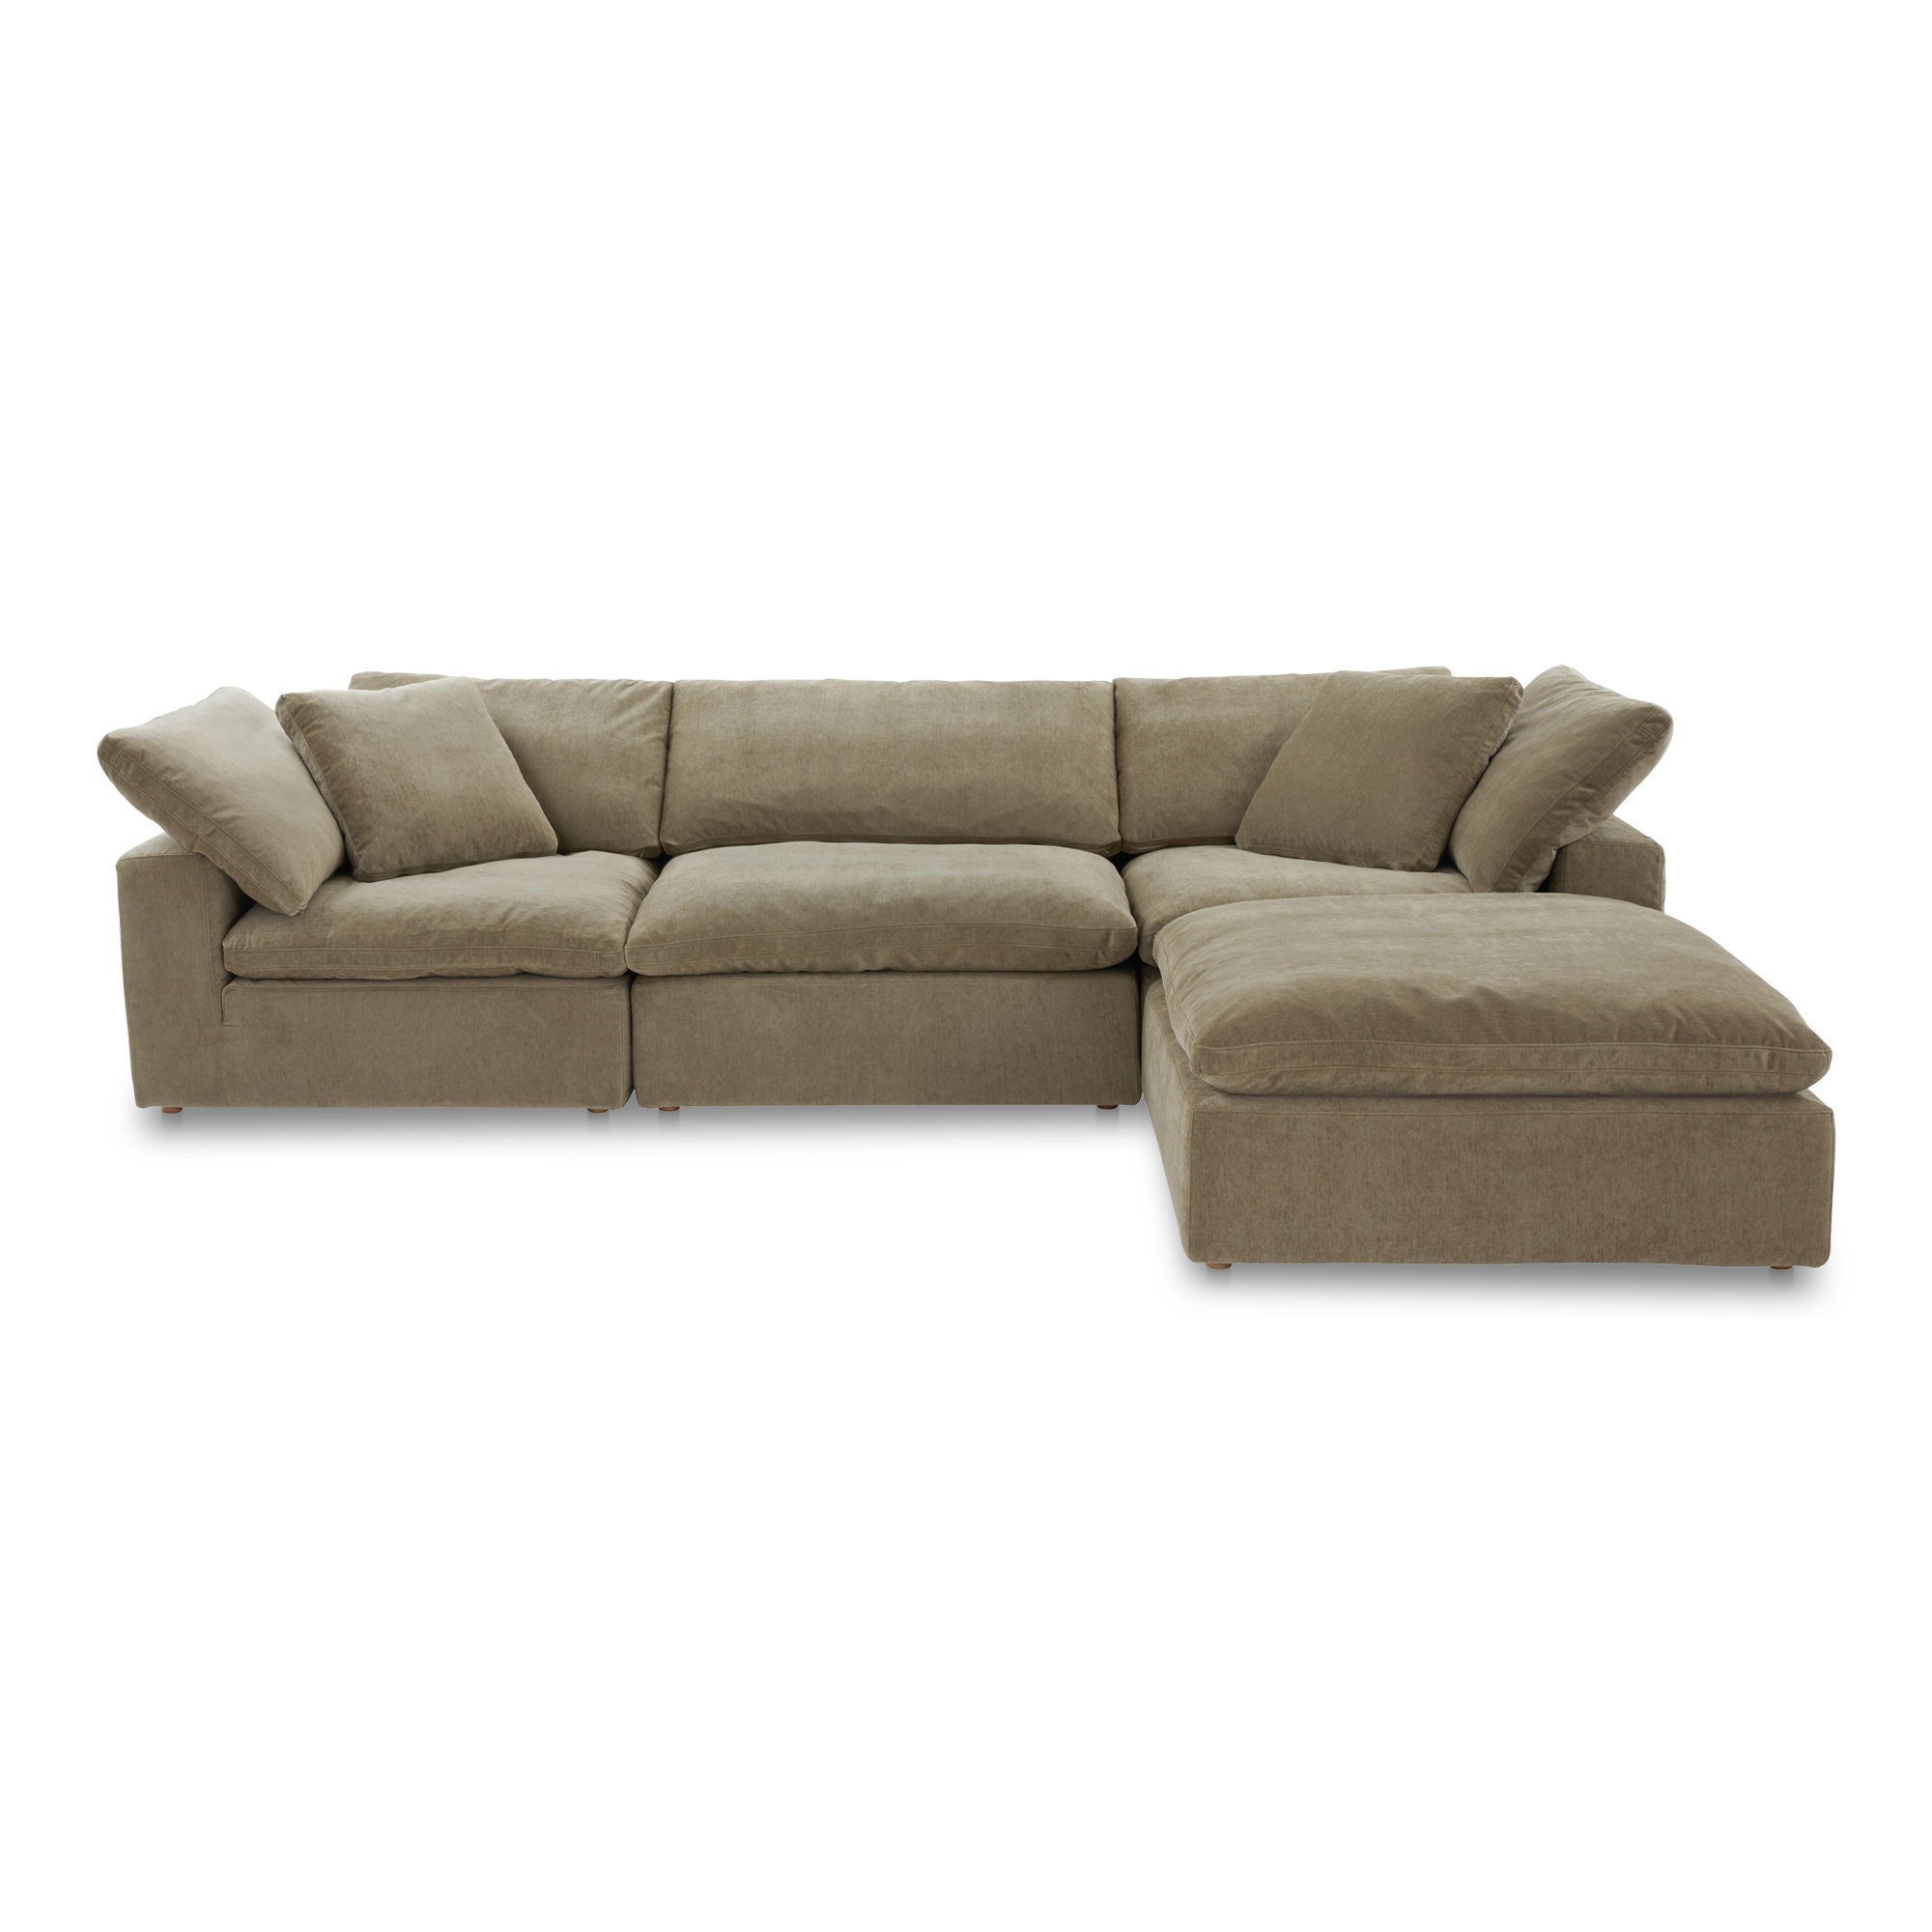 Desert Sage Modular Sectional - Terra, Stain-Resistant-Stationary Sectionals-American Furniture Outlet